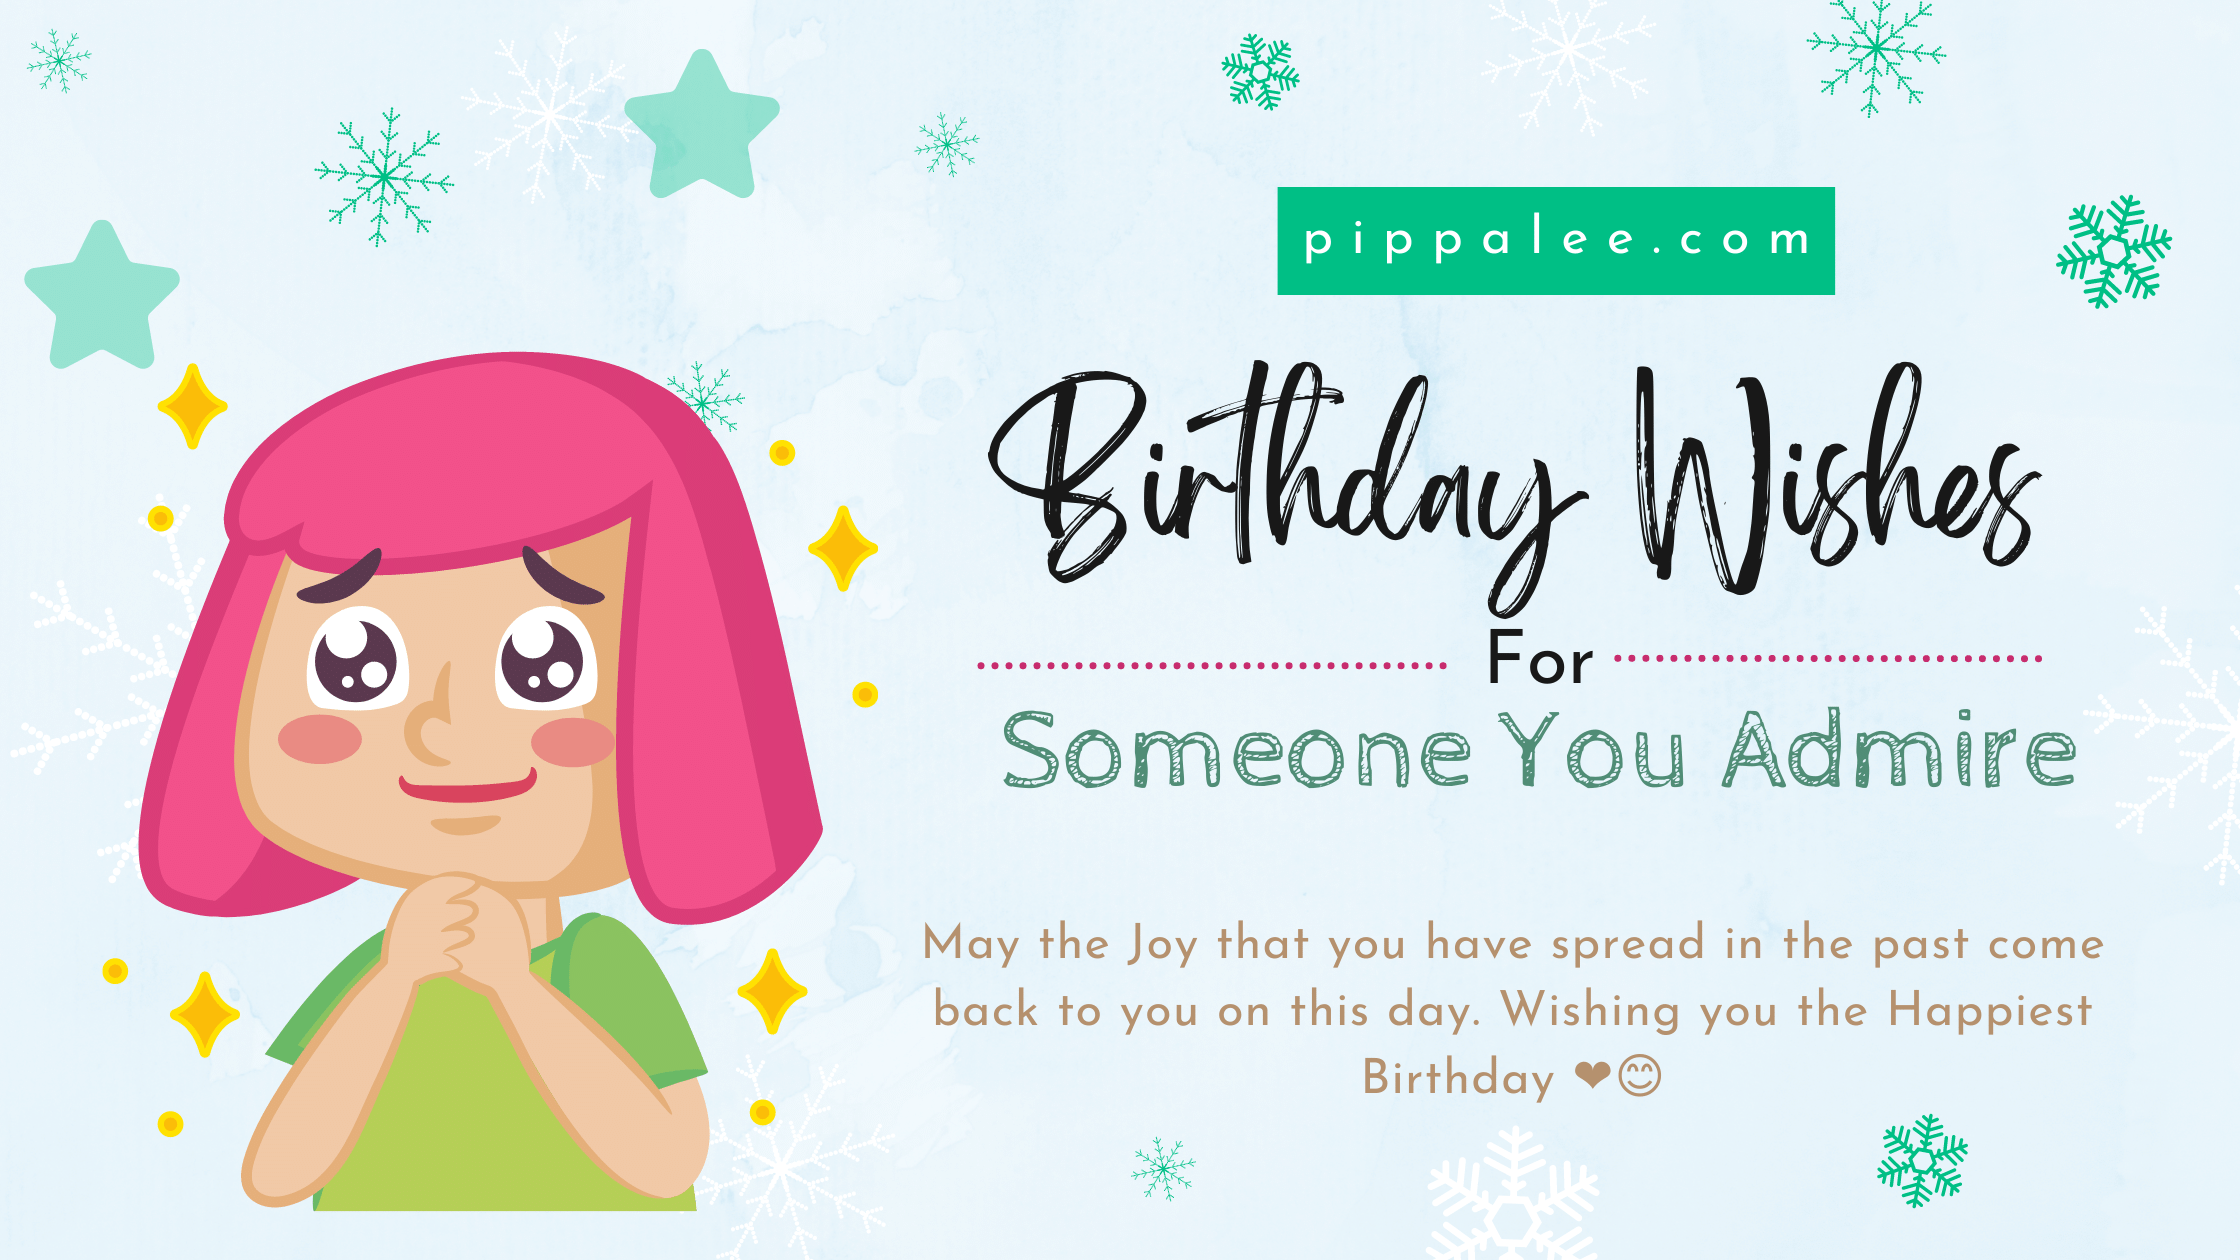 Birthday Wishes For Someone You Admire - Wishes & Messages